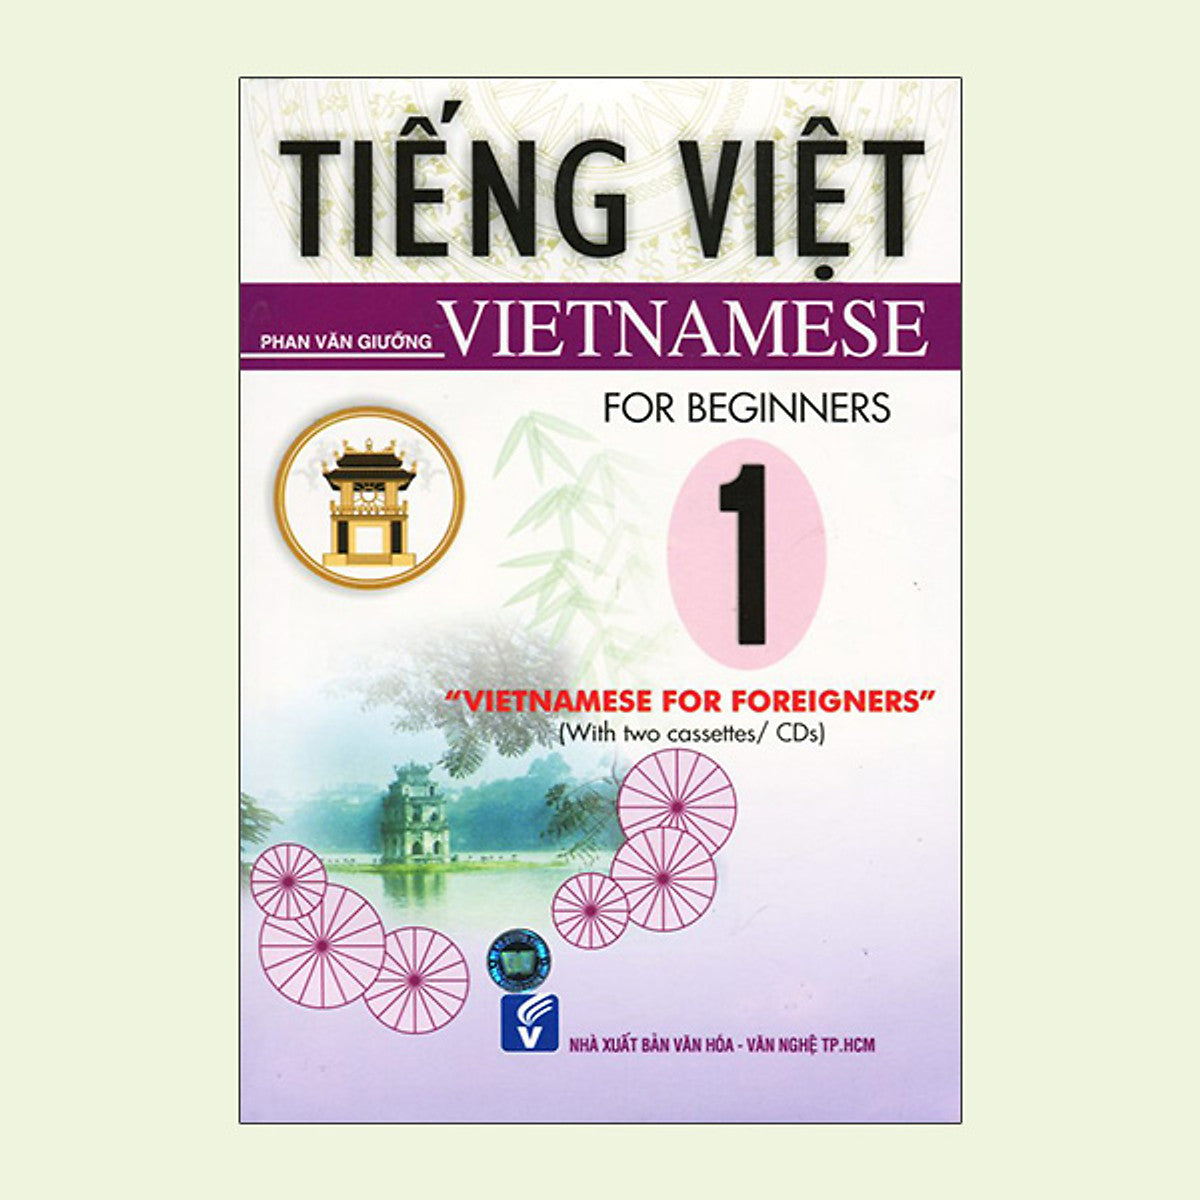 Tiếng Việt - Vietnamese For Foreigners 1 + 2Cds